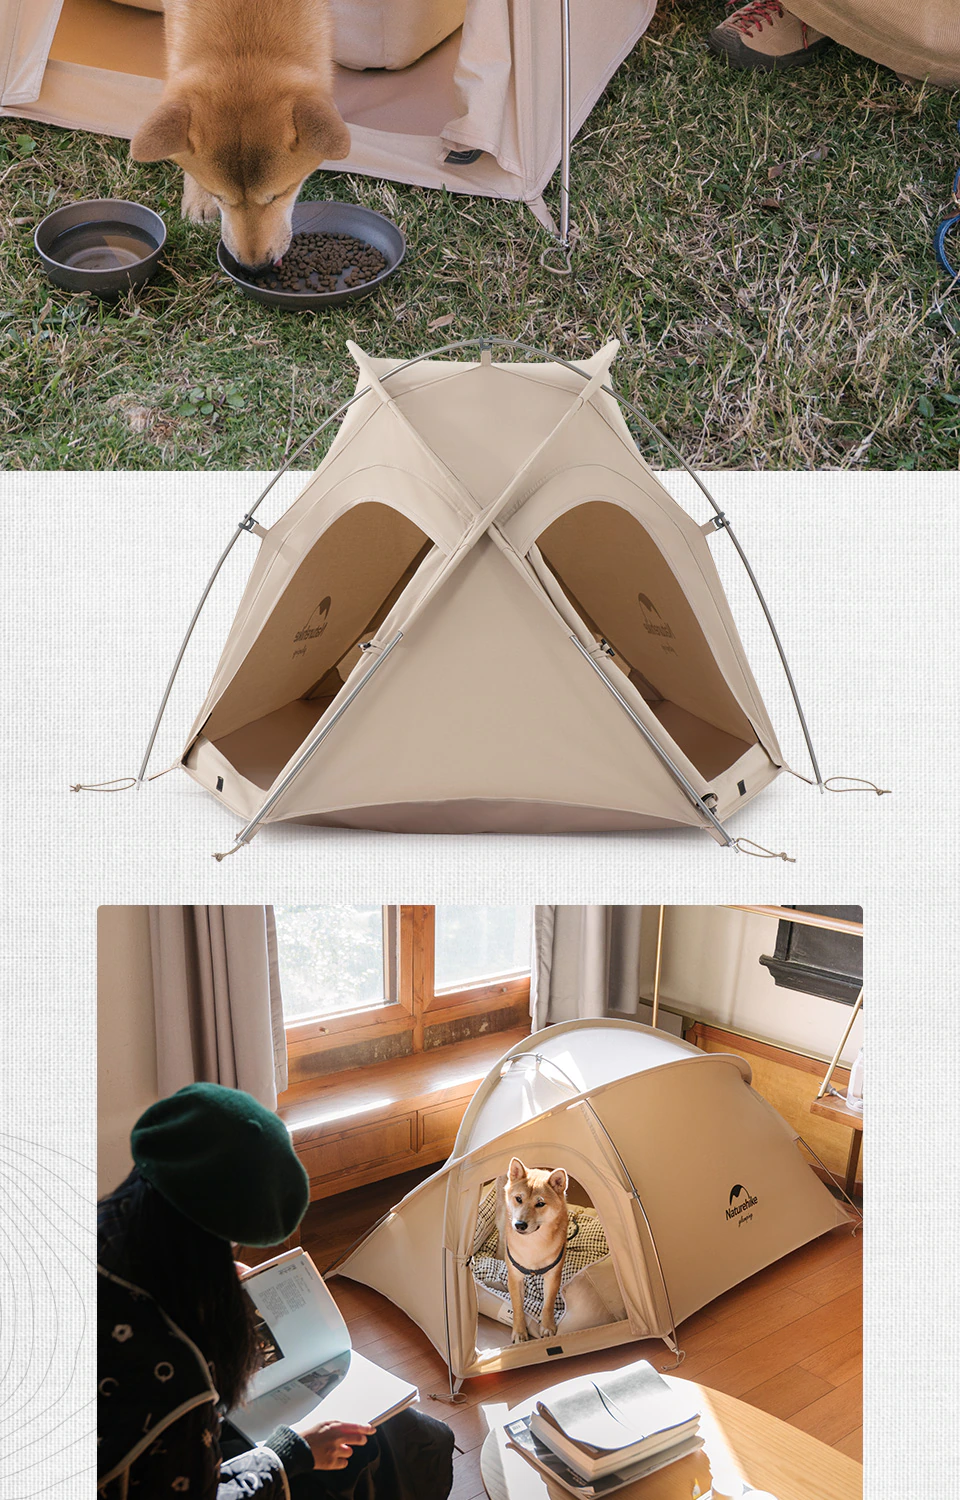 Cheap Goat Tents  Ultra Light Pet Tent Outdoor Portable Camping Trip  Quick Build Double Door Breathable Waterproof Cat Nest Doghouse   